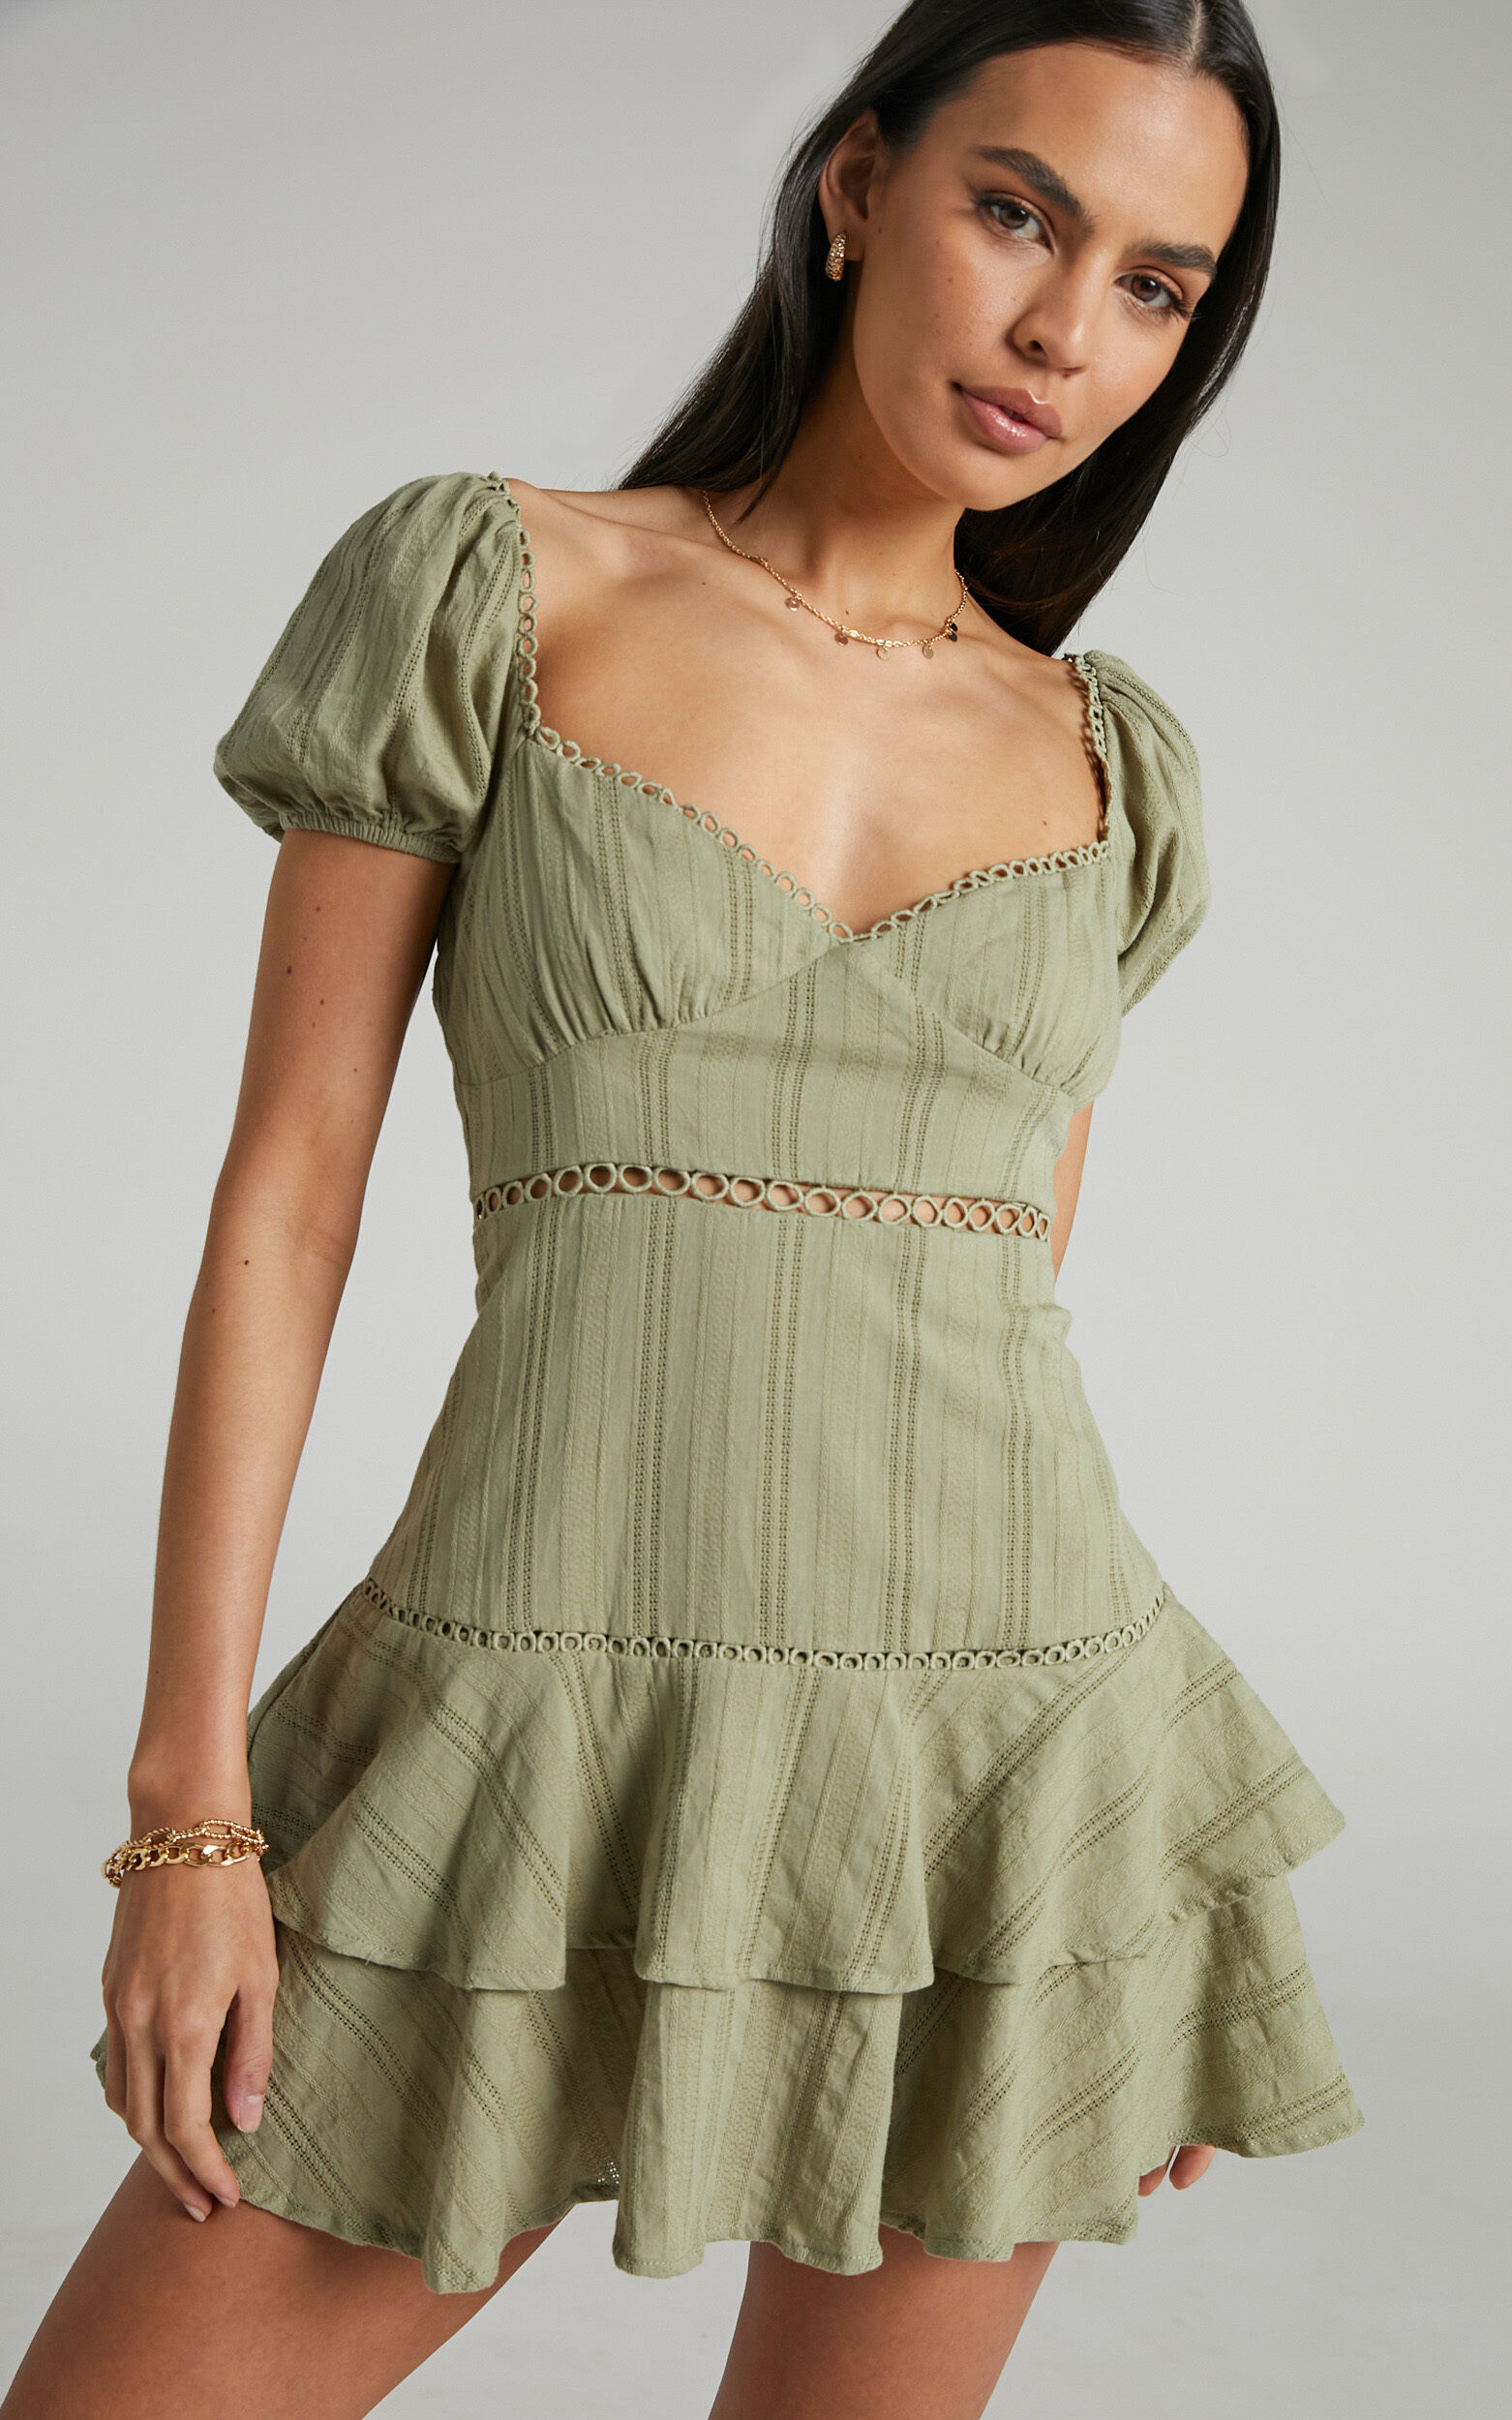 Rhyken Puff Sleeve Frill Detail Mini Dress in Khaki - 12, GRN1, super-hi-res image number null